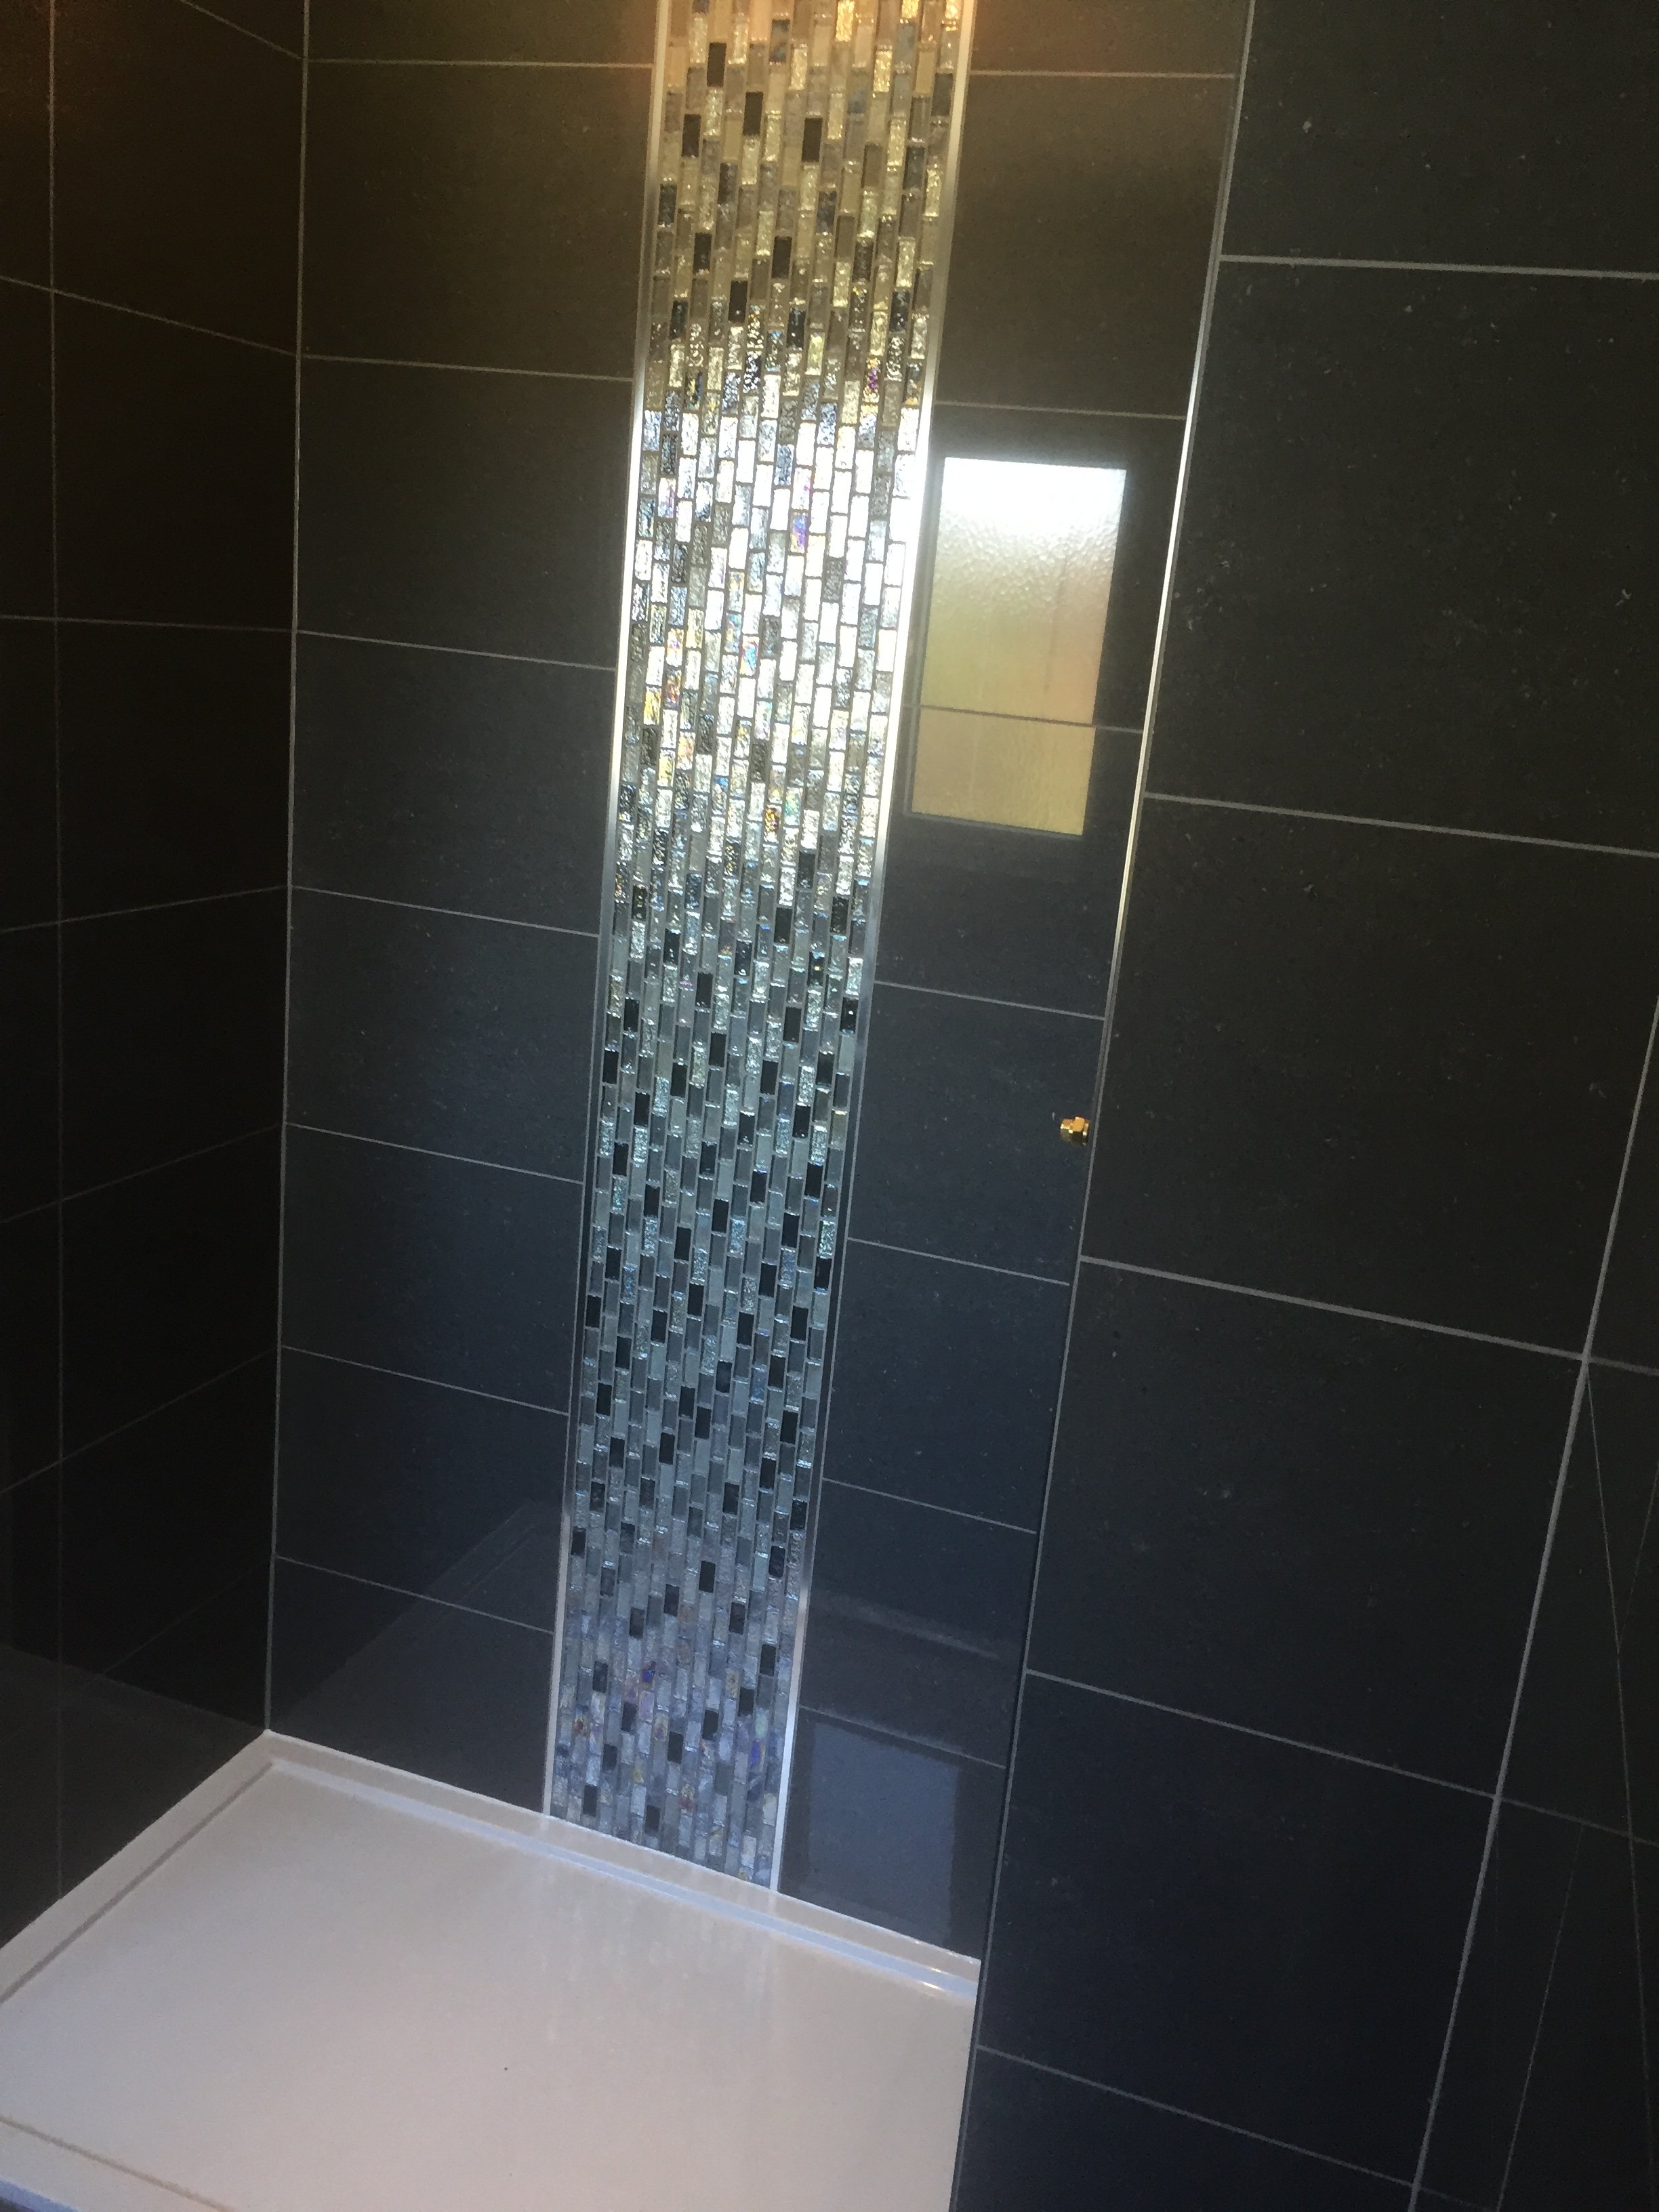 Mosaic feature in shower